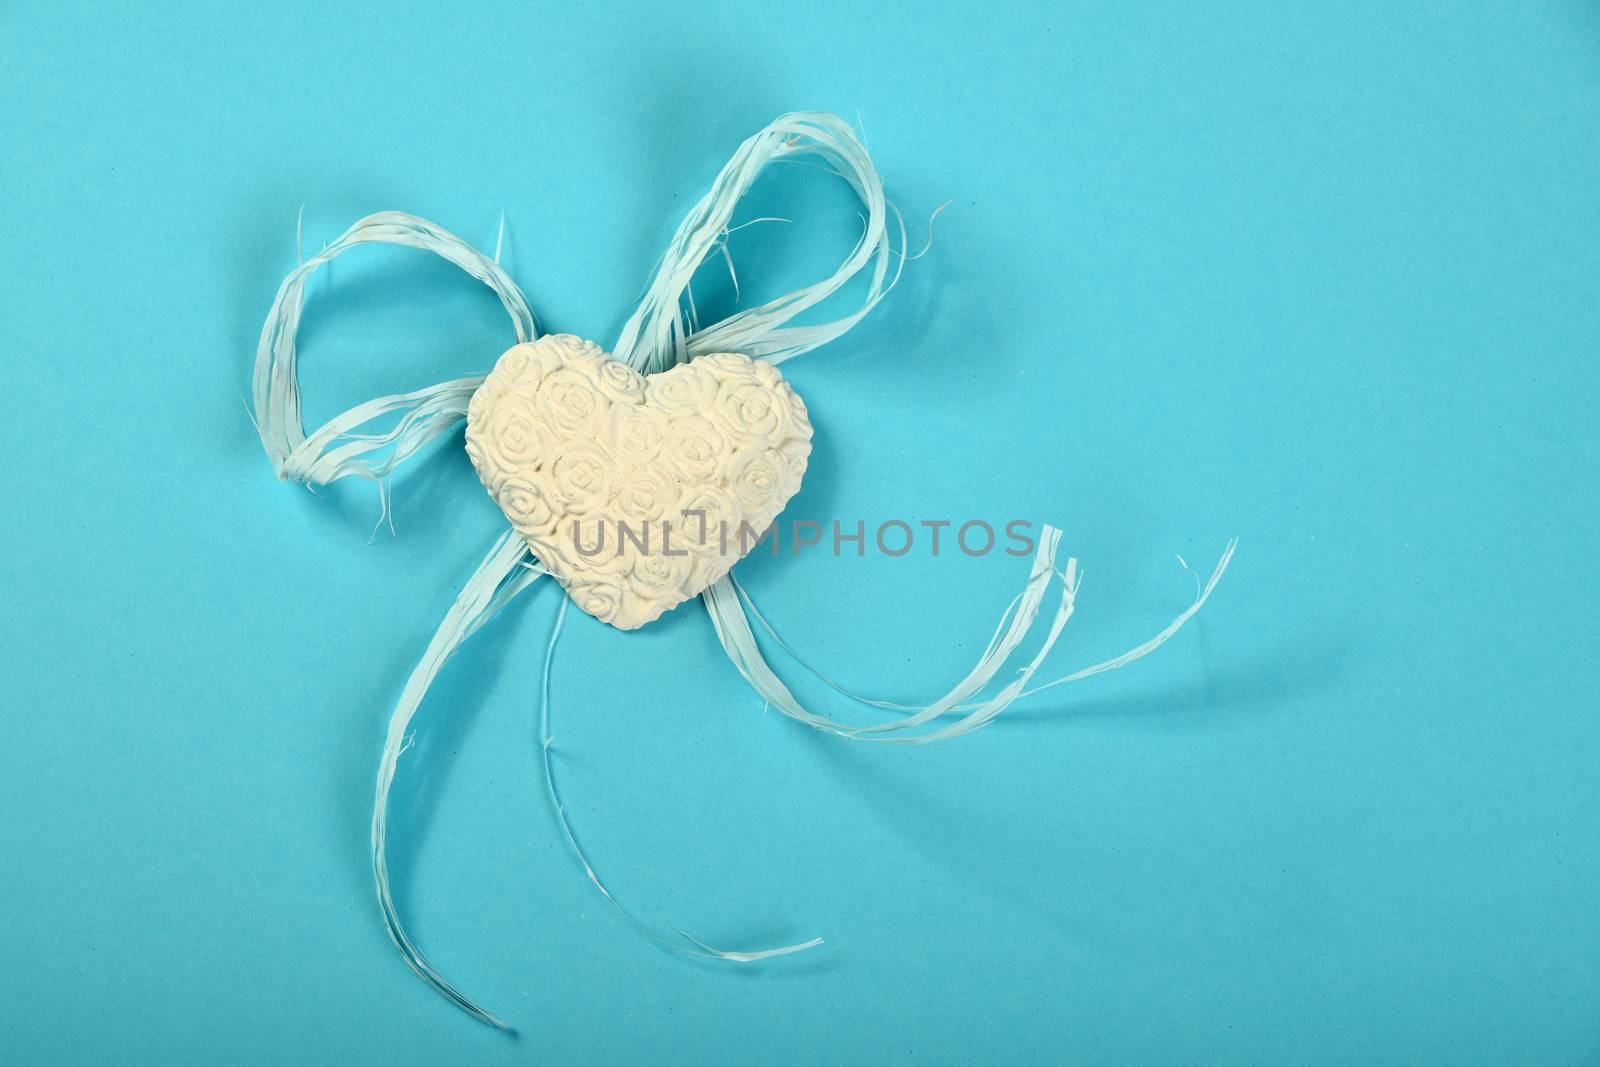 One gypsum alabaster handmade toy heart with roses flowers relief and rope on tender blue design paper background